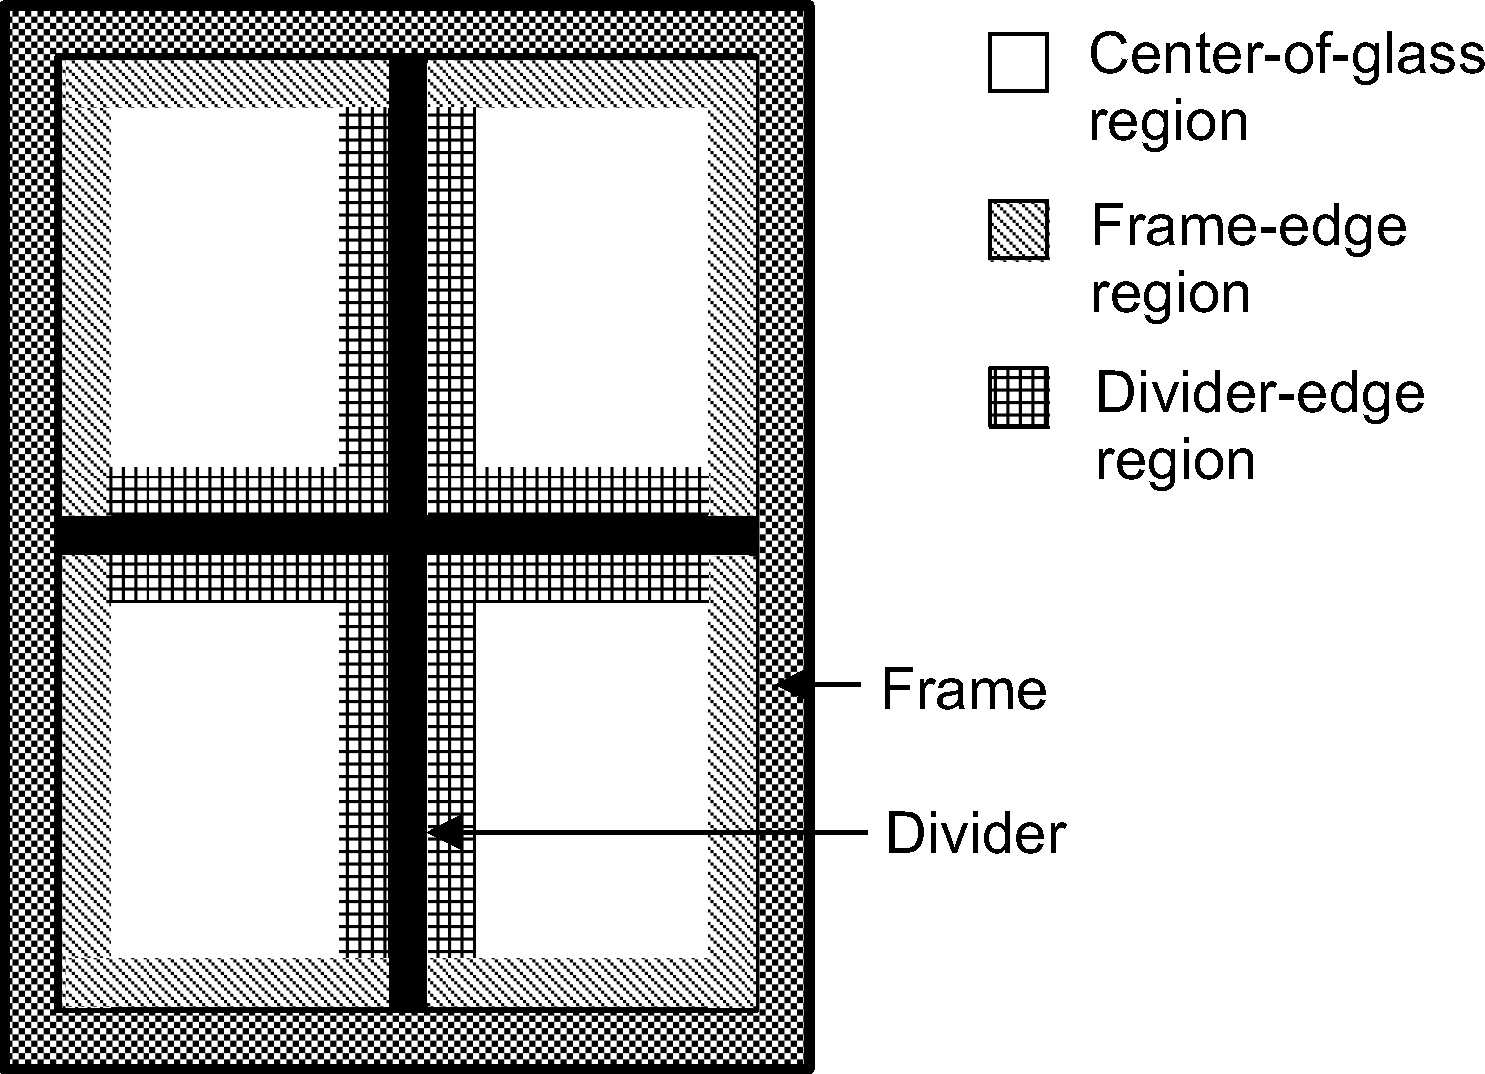 Different types of glass regions. [fig:different-types-of-glass-regions.]